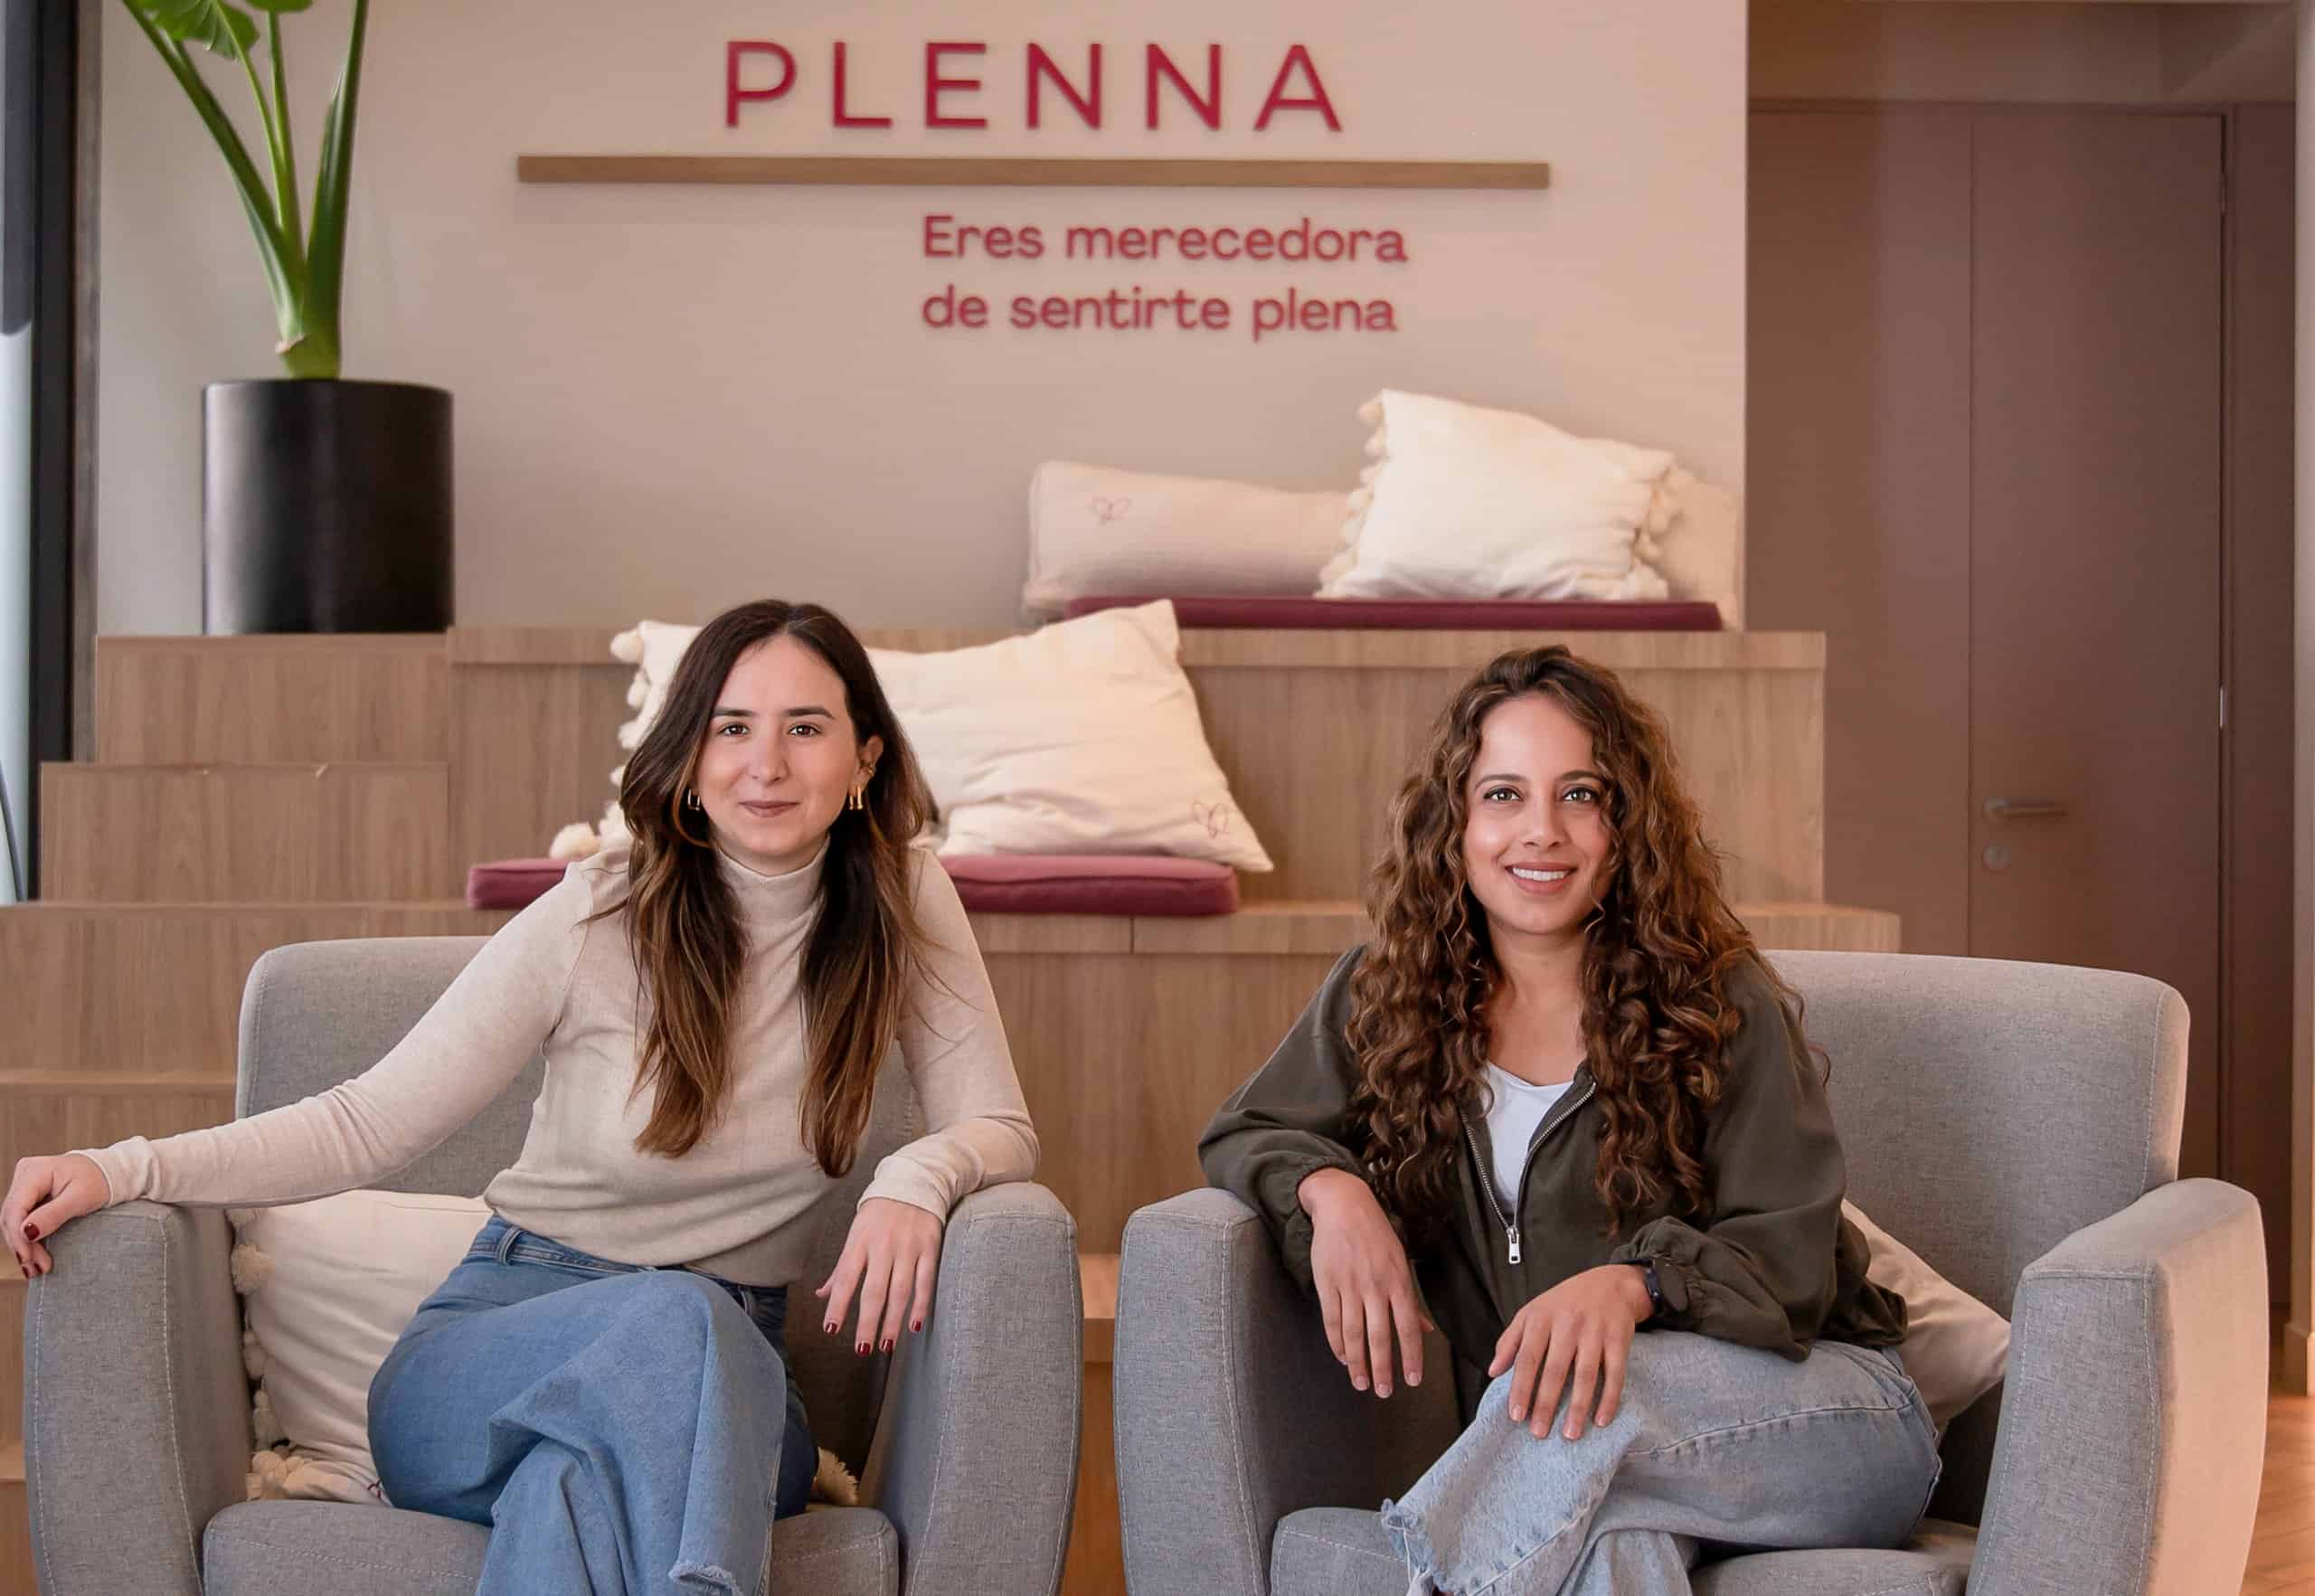 How Plenna Is Making Its Way Into The Femtech Industry, A Nascent Market In Latin America